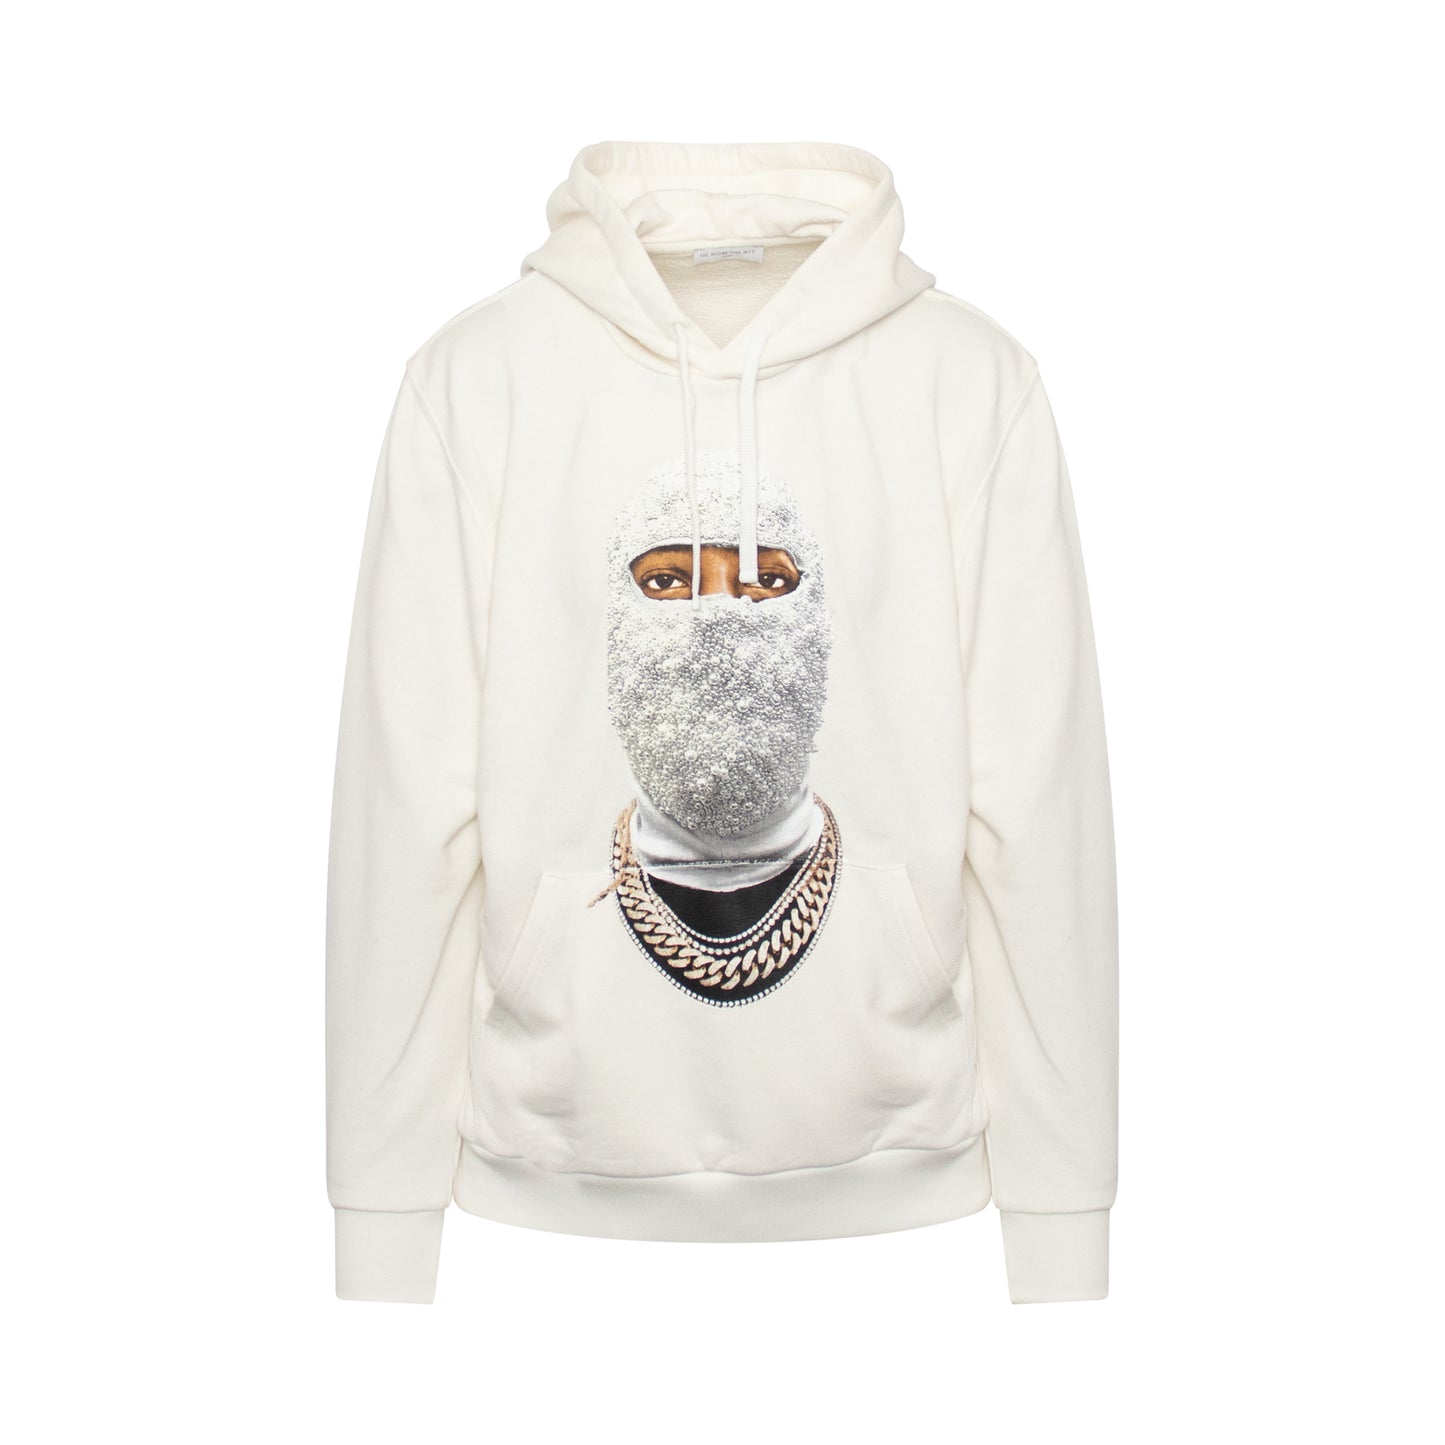 Future Hoodie in White